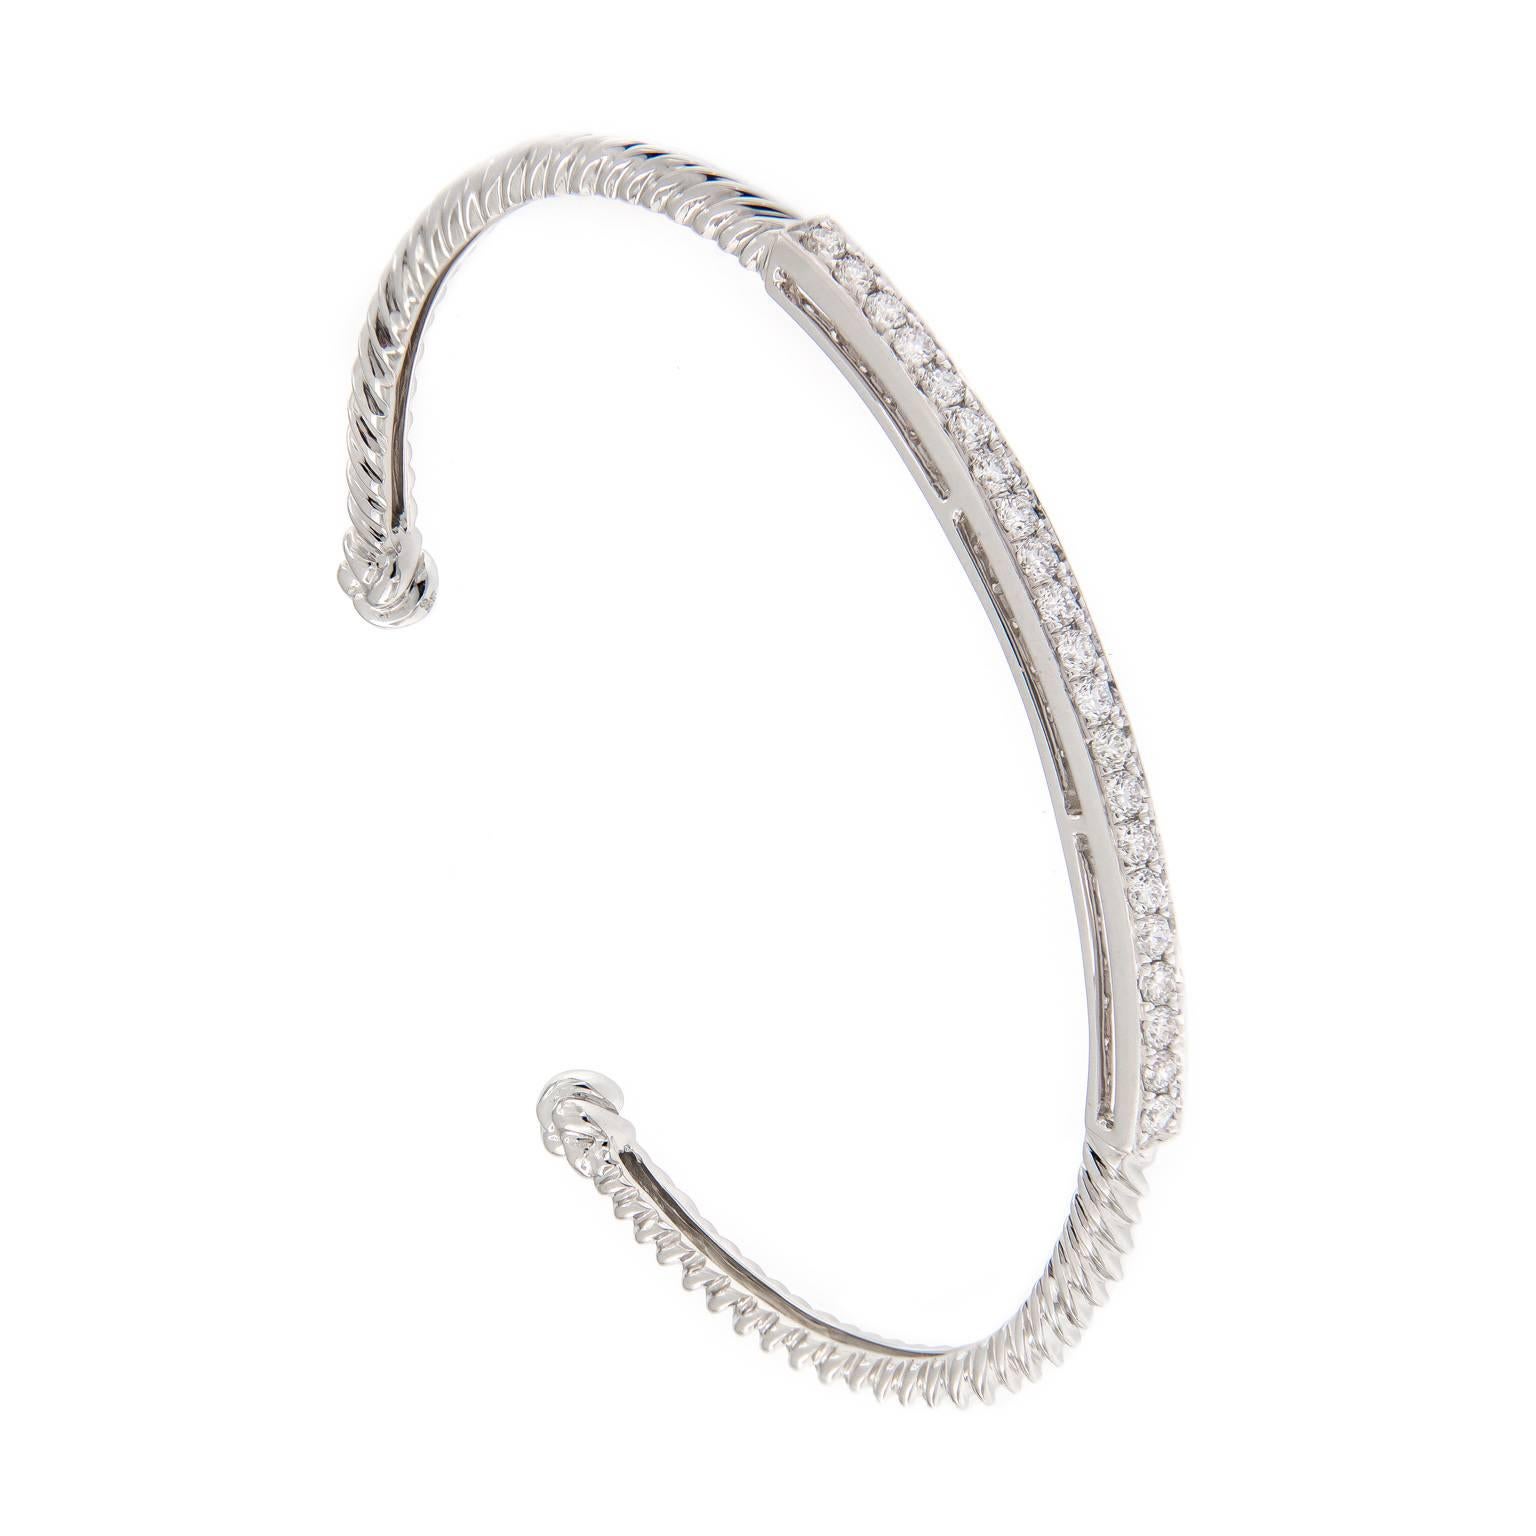 Classic cable design is expertly crafted in 18k white gold and nicely accented with 21 round brilliant cut diamonds. Striking on it’s own or stack two or more to create a bolder look. Weighs 11.5 grams.
Inner diameter 2.375 in x 1.75 in.  3.5 mm